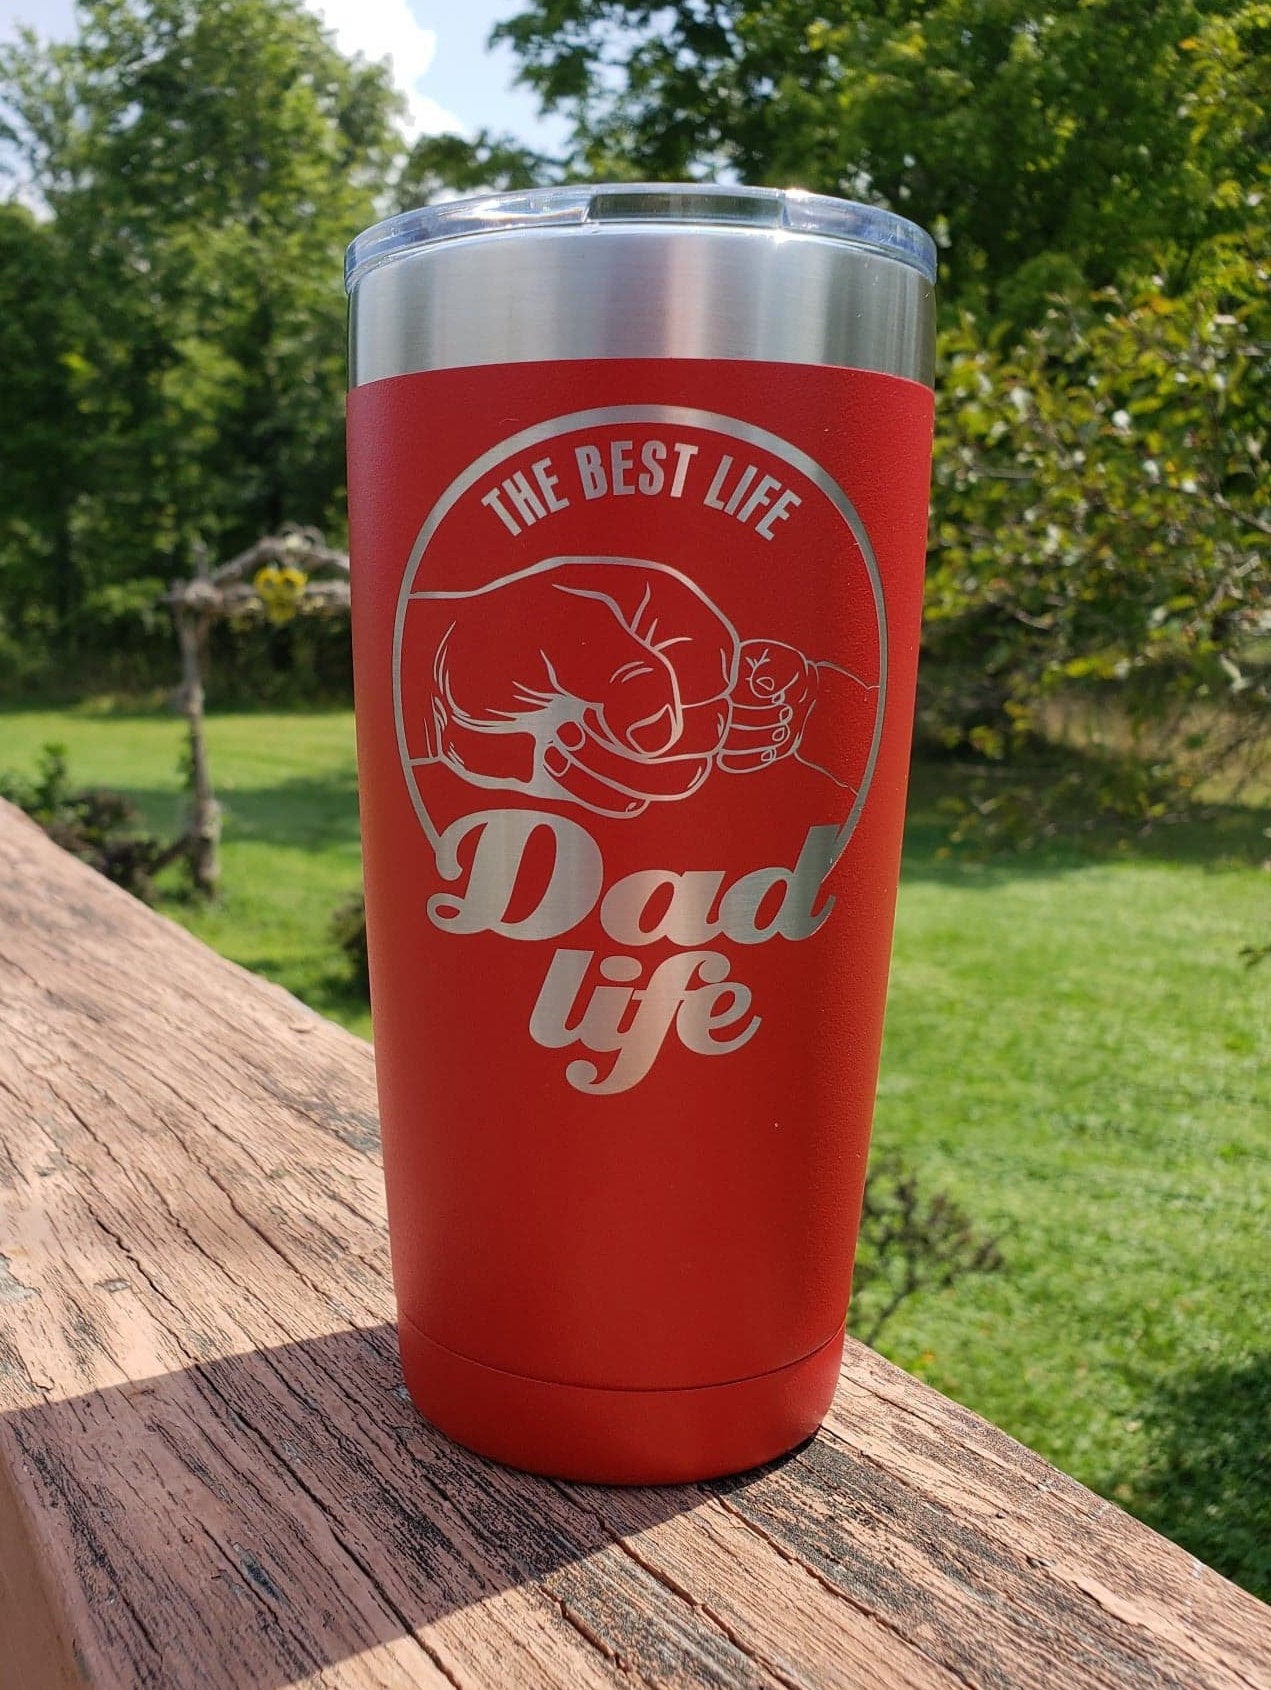 https://3cetching.com/wp-content/uploads/2020/09/dad-life-engraved-tumbler-yeti-style-cup-gift-for-him-5f5fb7db.jpg